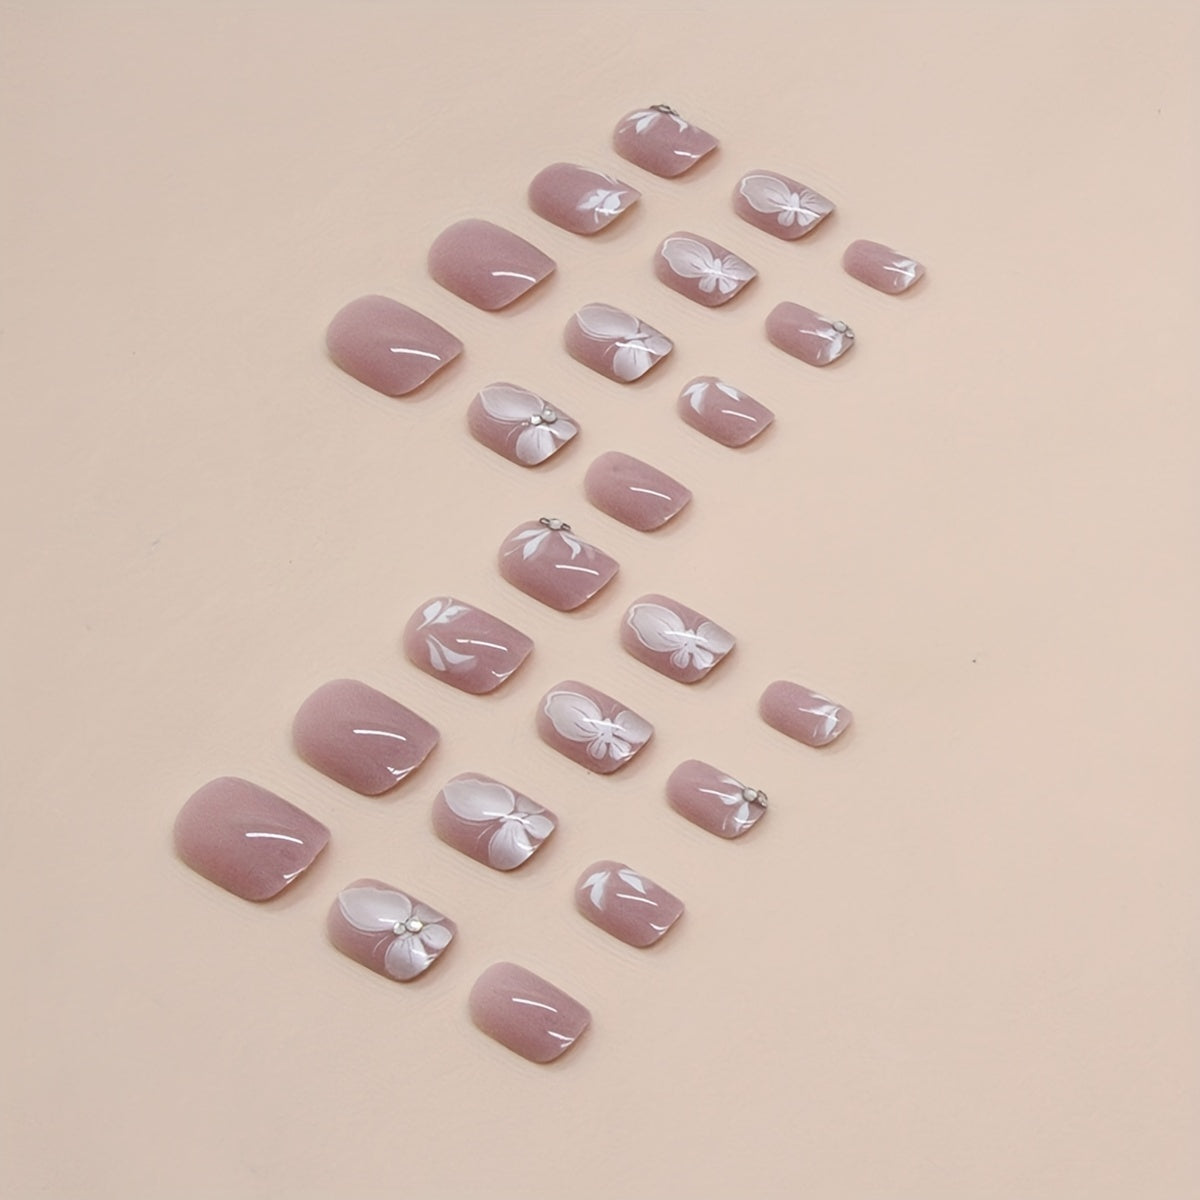 24-Piece Pink Butterfly Press-On Nails - Short Oval with Rhinestones, Durable Acrylic, Includes Nail File & Adhesive Tabs